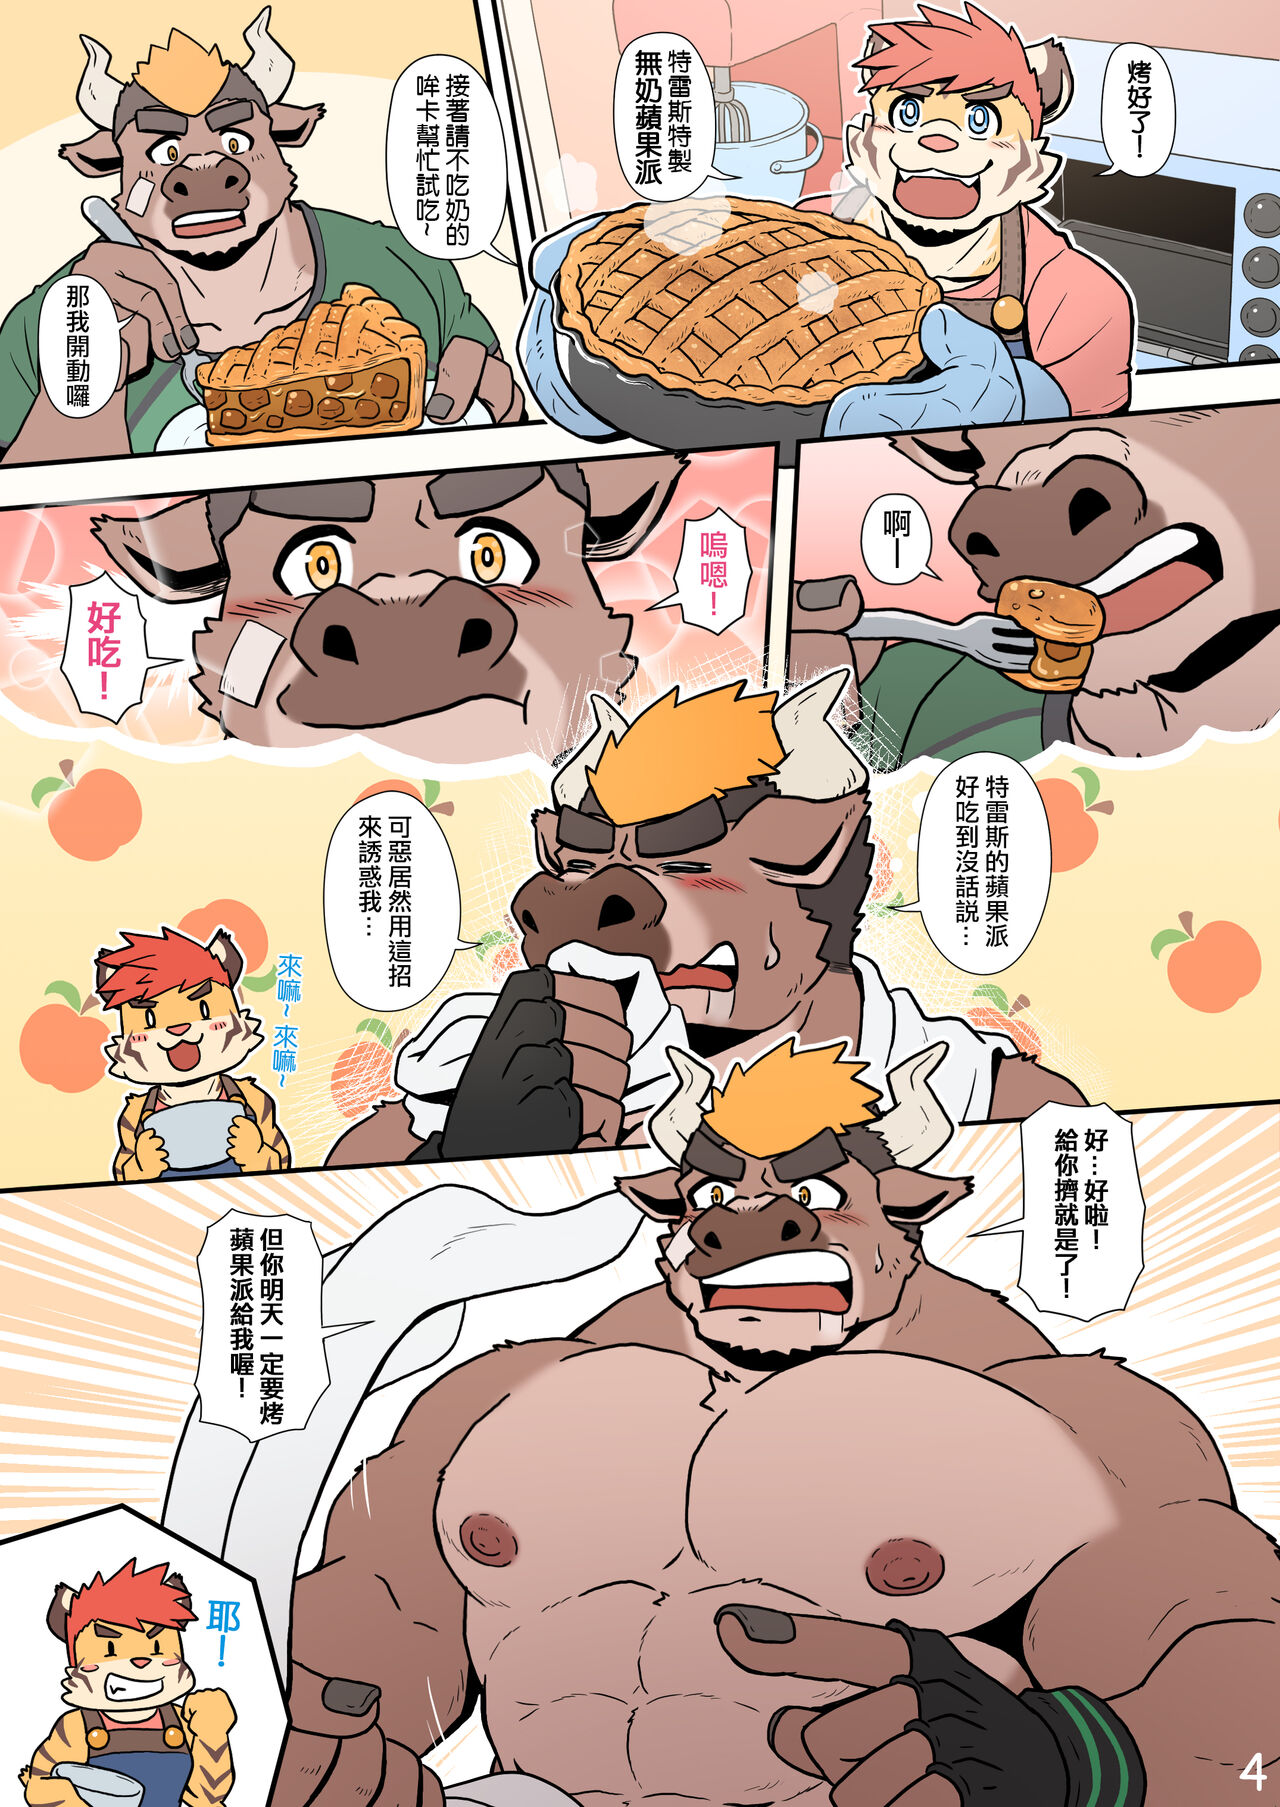 [Ripple Moon] My Milky Roomie: Homemade Pudding (Ongoing) [Chinese] (Flat Color) [漣漪月影] 牛奶好朋友: 手工布丁 (连载中) (单色版)